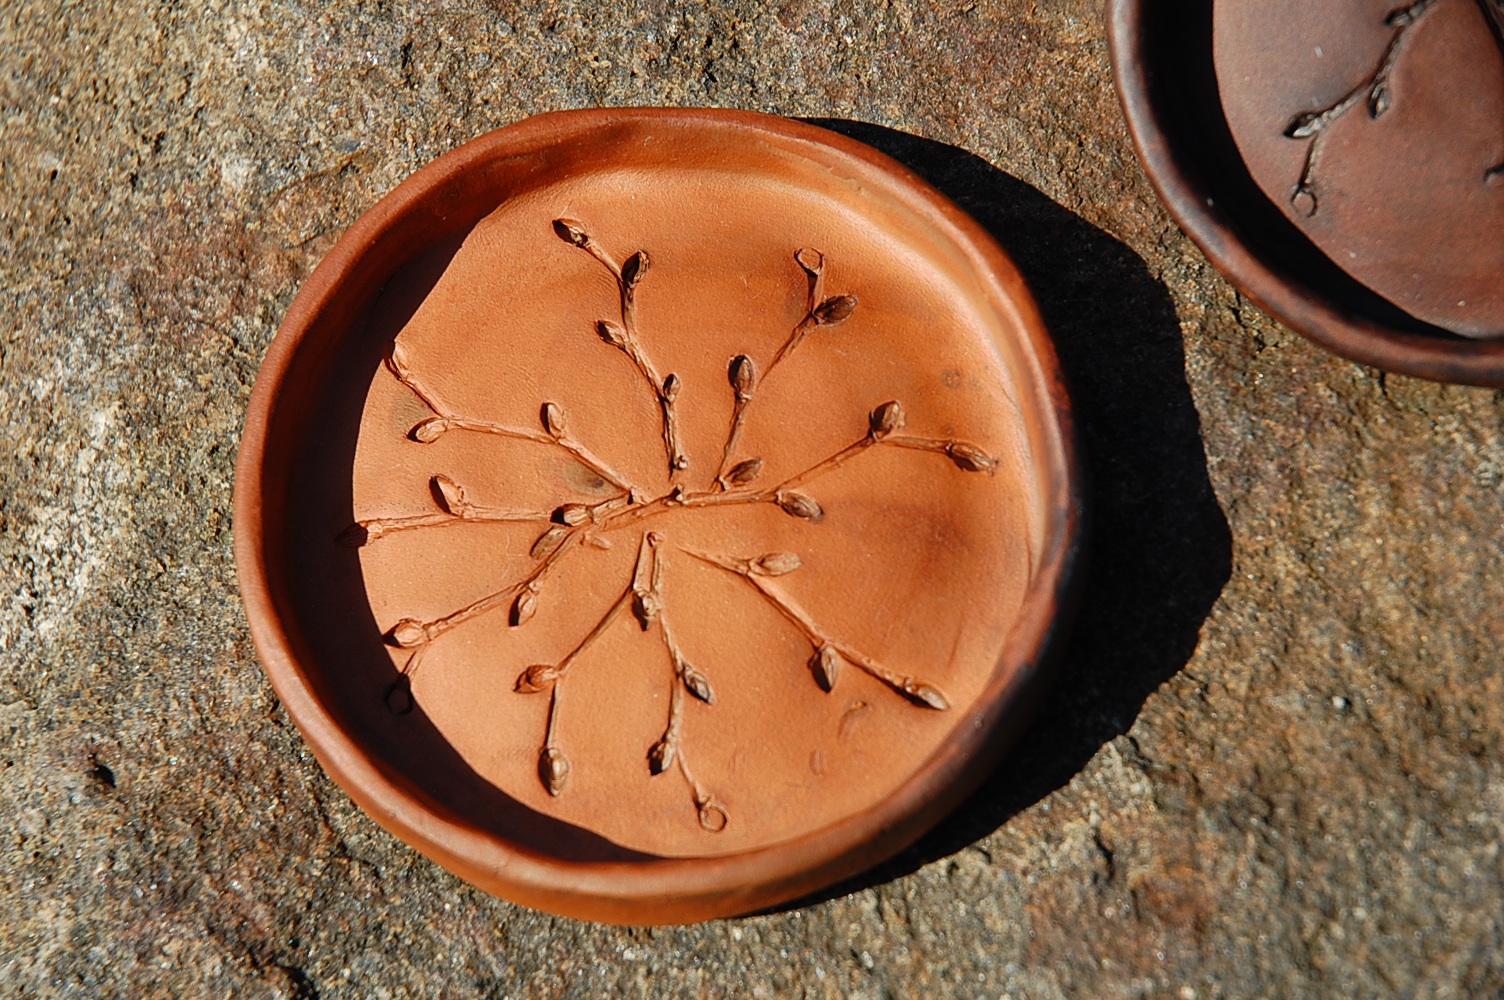 Pottery saucer "Spring"